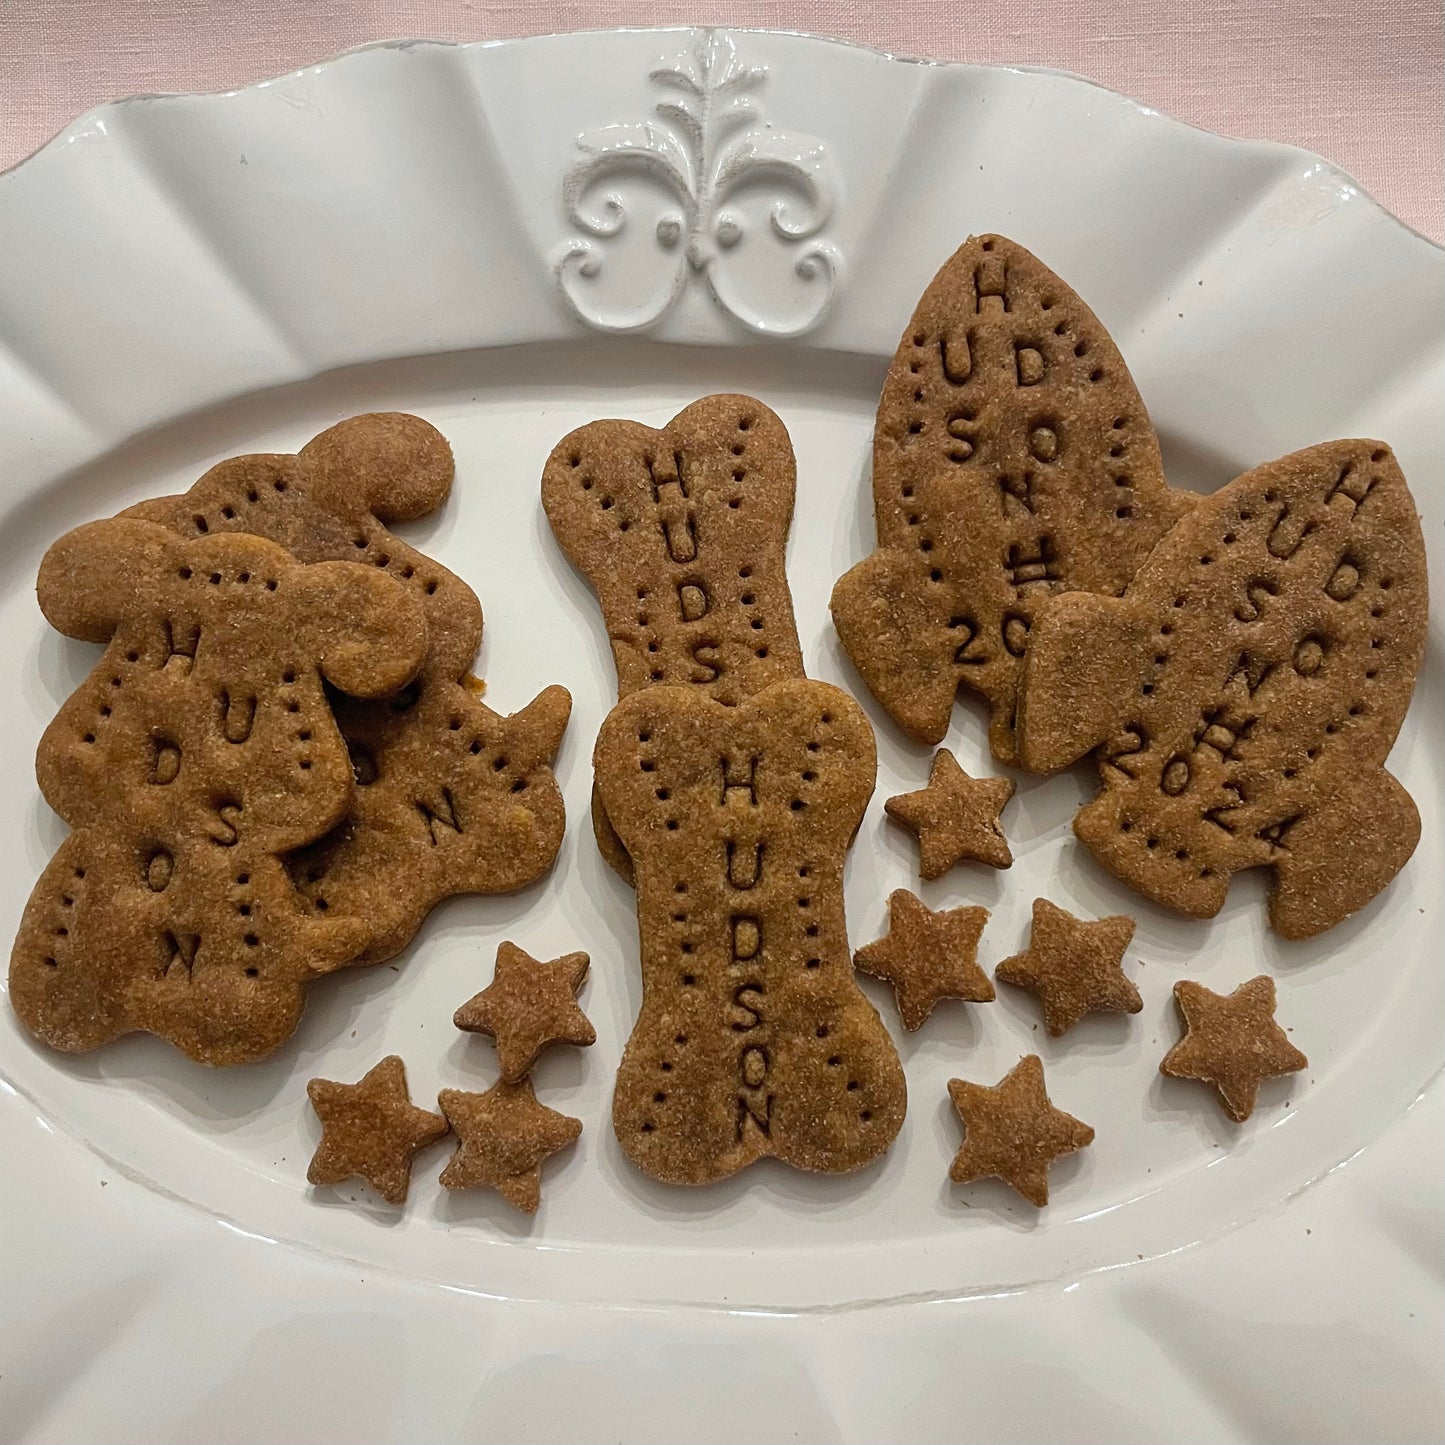 Large peanut butter dog cookies in the shapes of two dogs, two dog bones, and two rocket ships. All cookies are personalized with the name, "HUDSON."